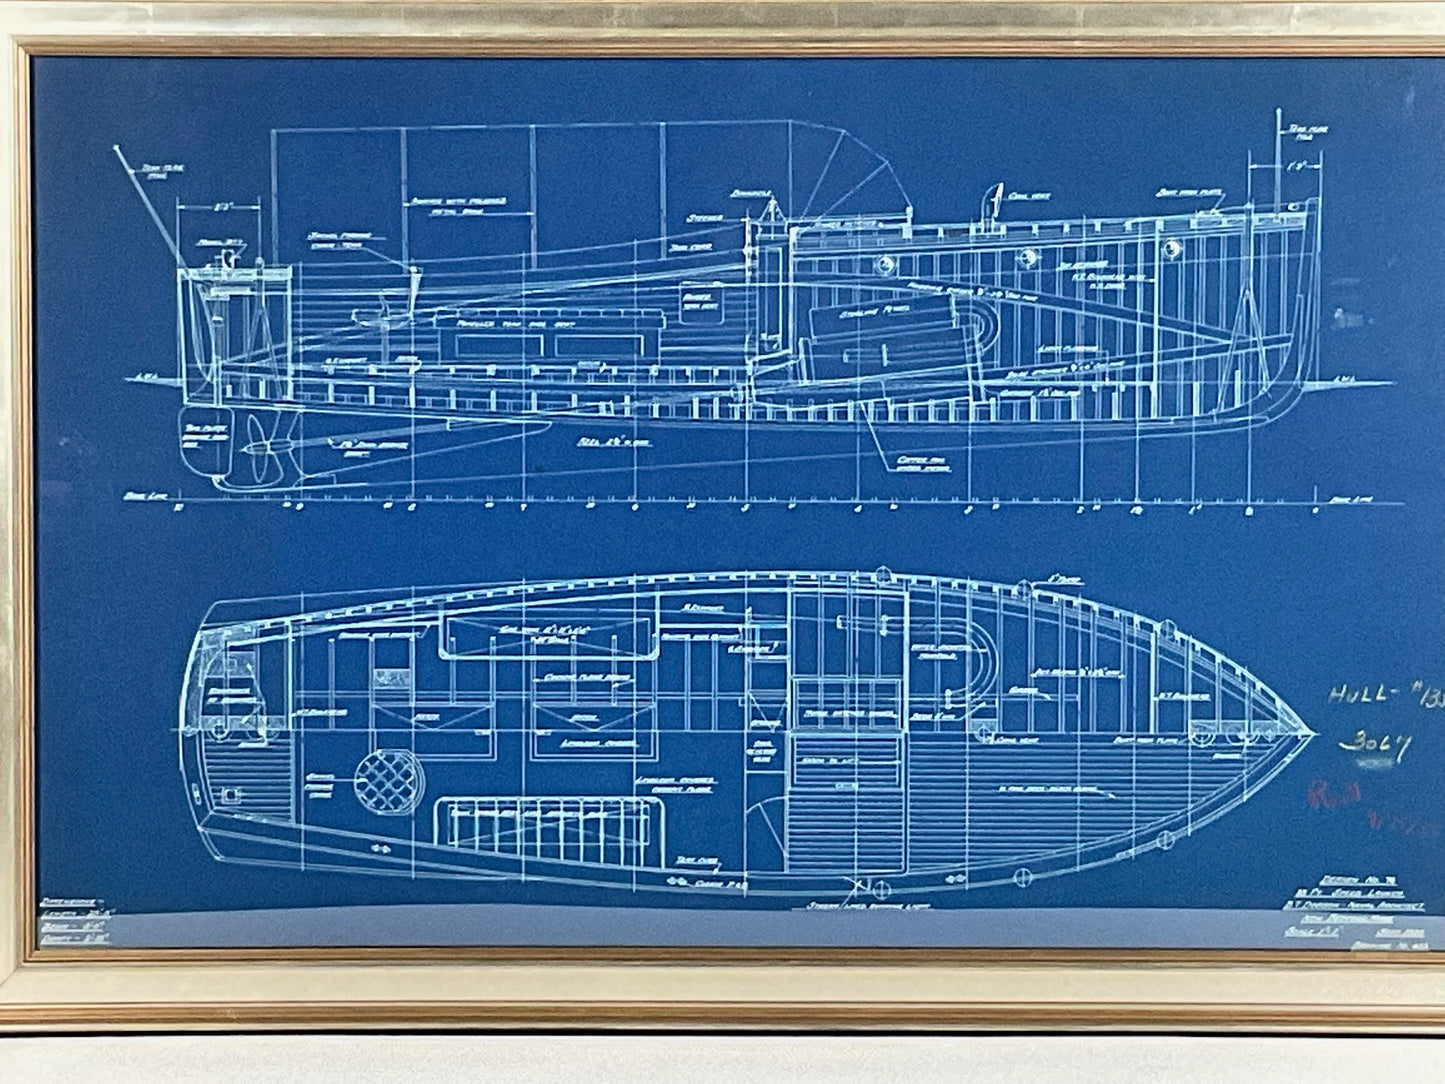 Yacht Blueprint of a Launch by B.T. Dobson Naval Architect.